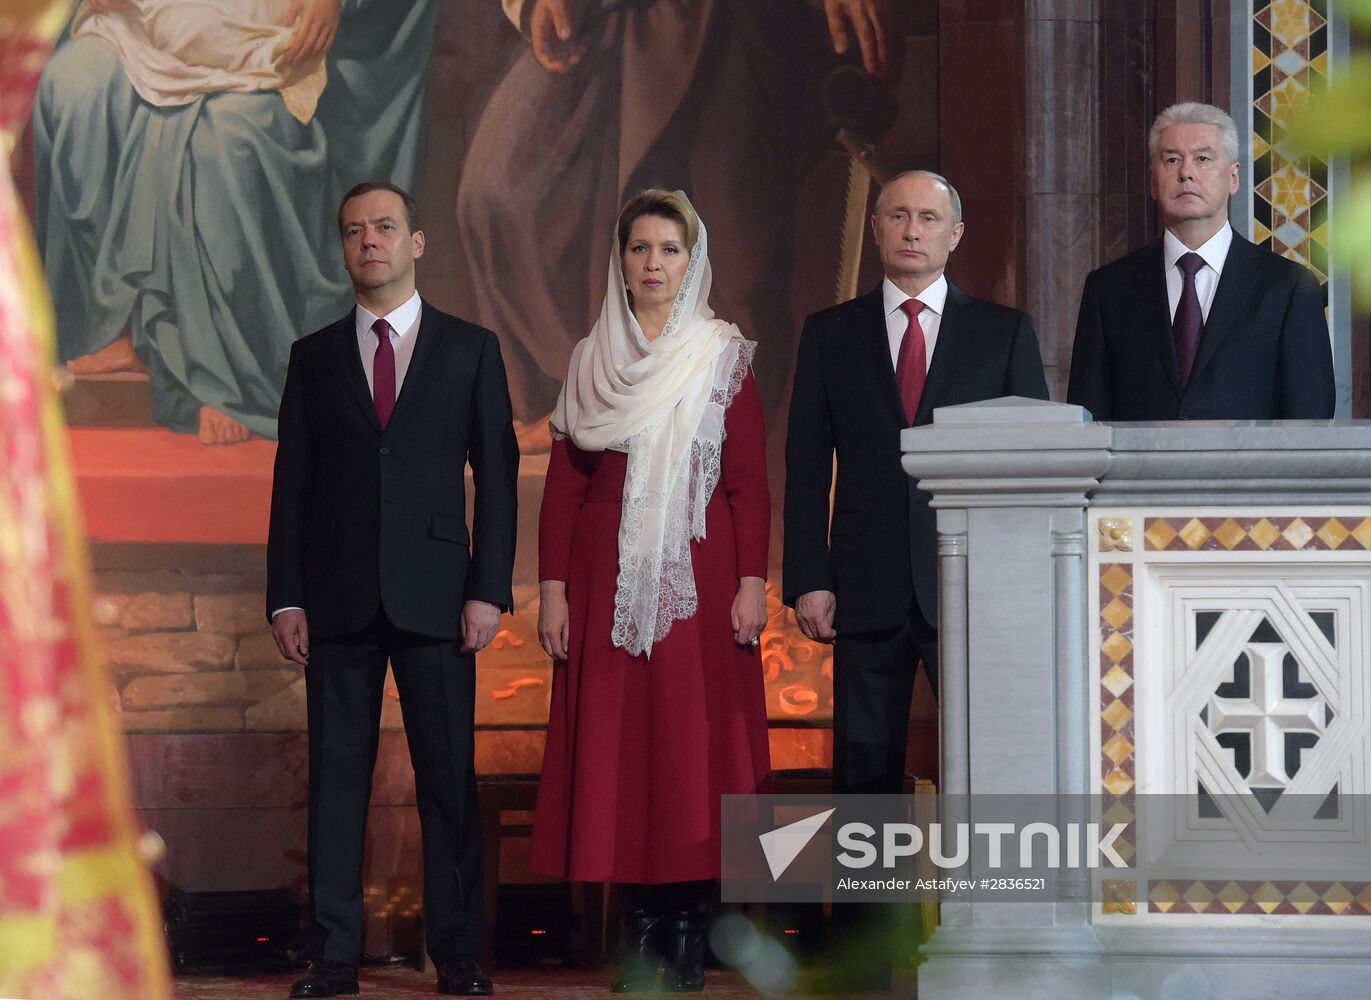 Russian President Vladimir Putin and Russian Prime Minister Dmitry Medvedev attend Easter service at Christ the Savior Cathedral in Moscow